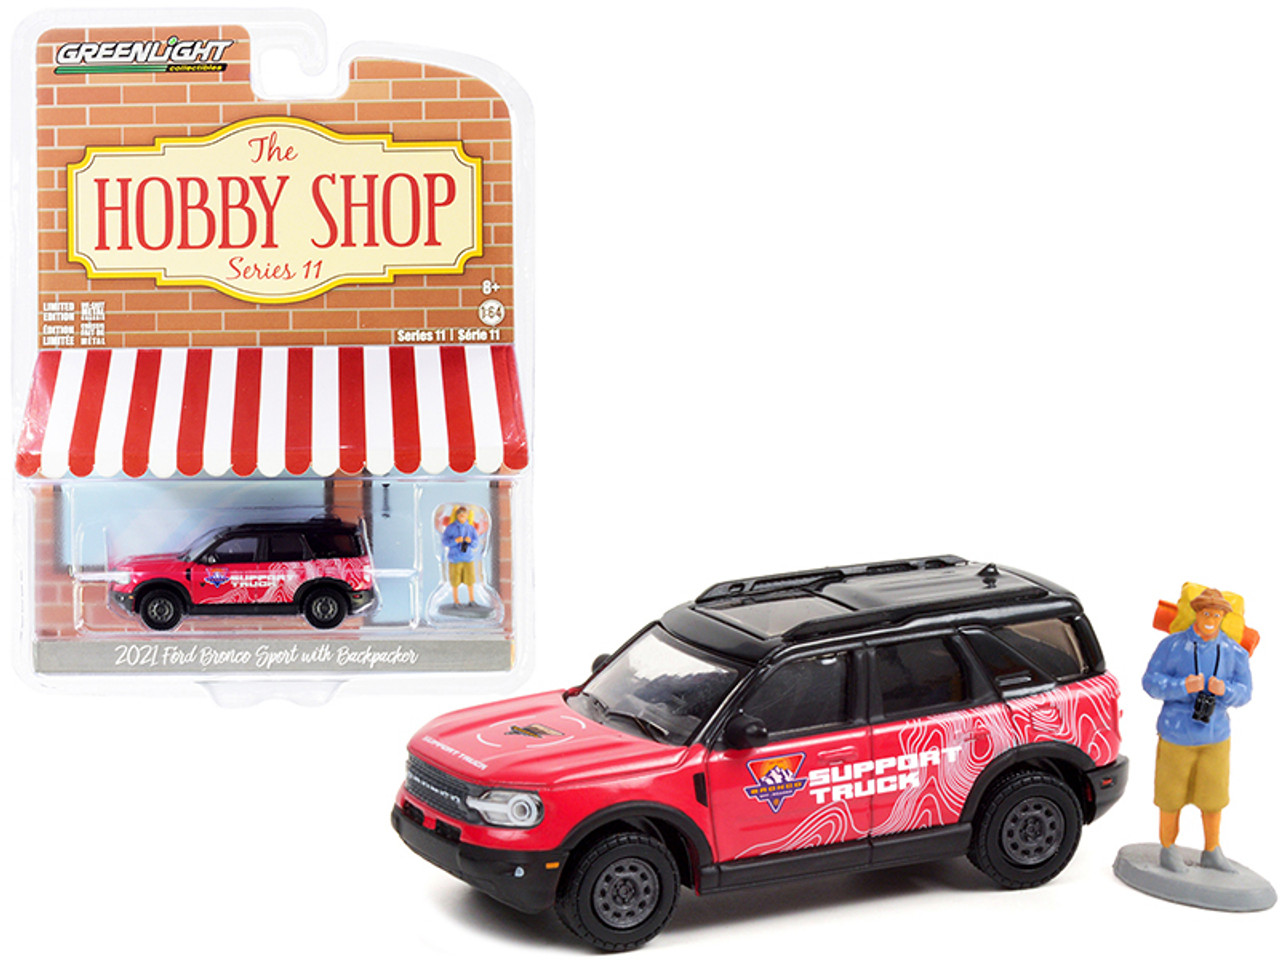 2021 Ford Bronco Sport Pink and Black "Off-Roadeo Adventure Support Truck" with Backpacker Figurine "The Hobby Shop" Series 11 1/64 Diecast Model Car by Greenlight